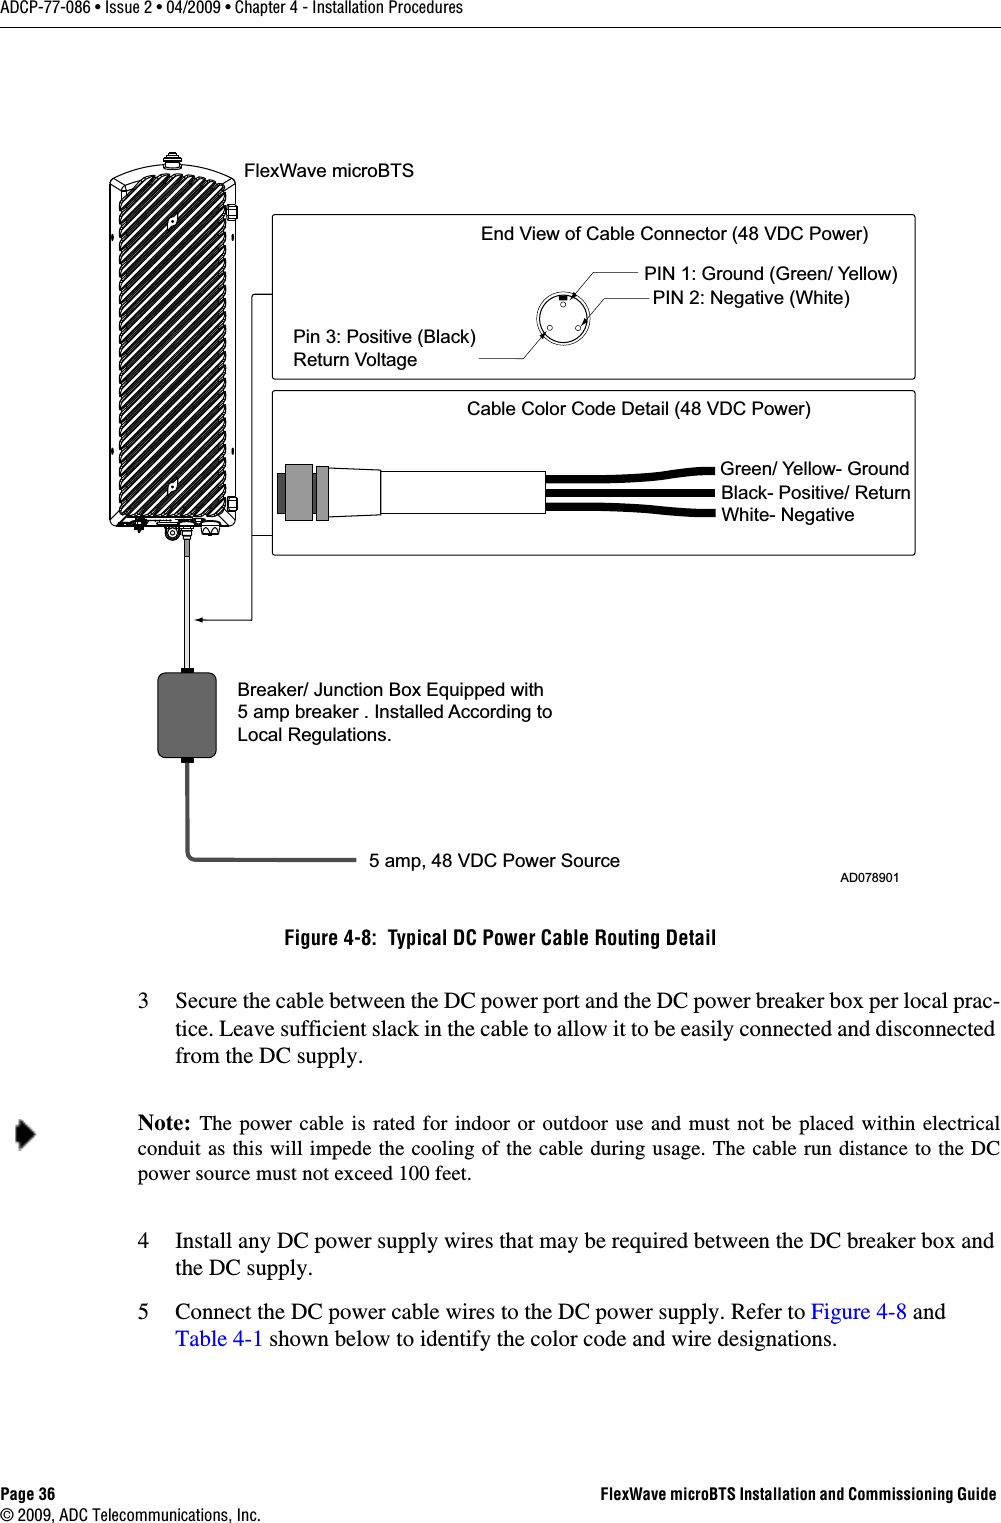 Page 36 FlexWave microBTS Installation and Commissioning Guide © 2009, ADC Telecommunications, Inc.ADCP-77-086 • Issue 2 • 04/2009 • Chapter 4 - Installation Procedures3 Secure the cable between the DC power port and the DC power breaker box per local prac-tice. Leave sufficient slack in the cable to allow it to be easily connected and disconnected from the DC supply. 4 Install any DC power supply wires that may be required between the DC breaker box and the DC supply. 5 Connect the DC power cable wires to the DC power supply. Refer to Figure 4-8 and Table 4-1 shown below to identify the color code and wire designations. Figure 4-8:  Typical DC Power Cable Routing DetailNote: The power cable is rated for indoor or outdoor use and must not be placed within electrical conduit as this will impede the cooling of the cable during usage. The cable run distance to the DC power source must not exceed 100 feet. FlexWave microBTS AD078901End View of Cable Connector (48 VDC Power)PIN 1: Ground (Green/ Yellow)PIN 2: Negative (White)Pin 3: Positive (Black)Return Voltage5 amp, 48 VDC Power SourceBreaker/ Junction Box Equipped with 5 amp breaker . Installed According toLocal Regulations.White- NegativeBlack- Positive/ ReturnGreen/ Yellow- GroundCable Color Code Detail (48 VDC Power)